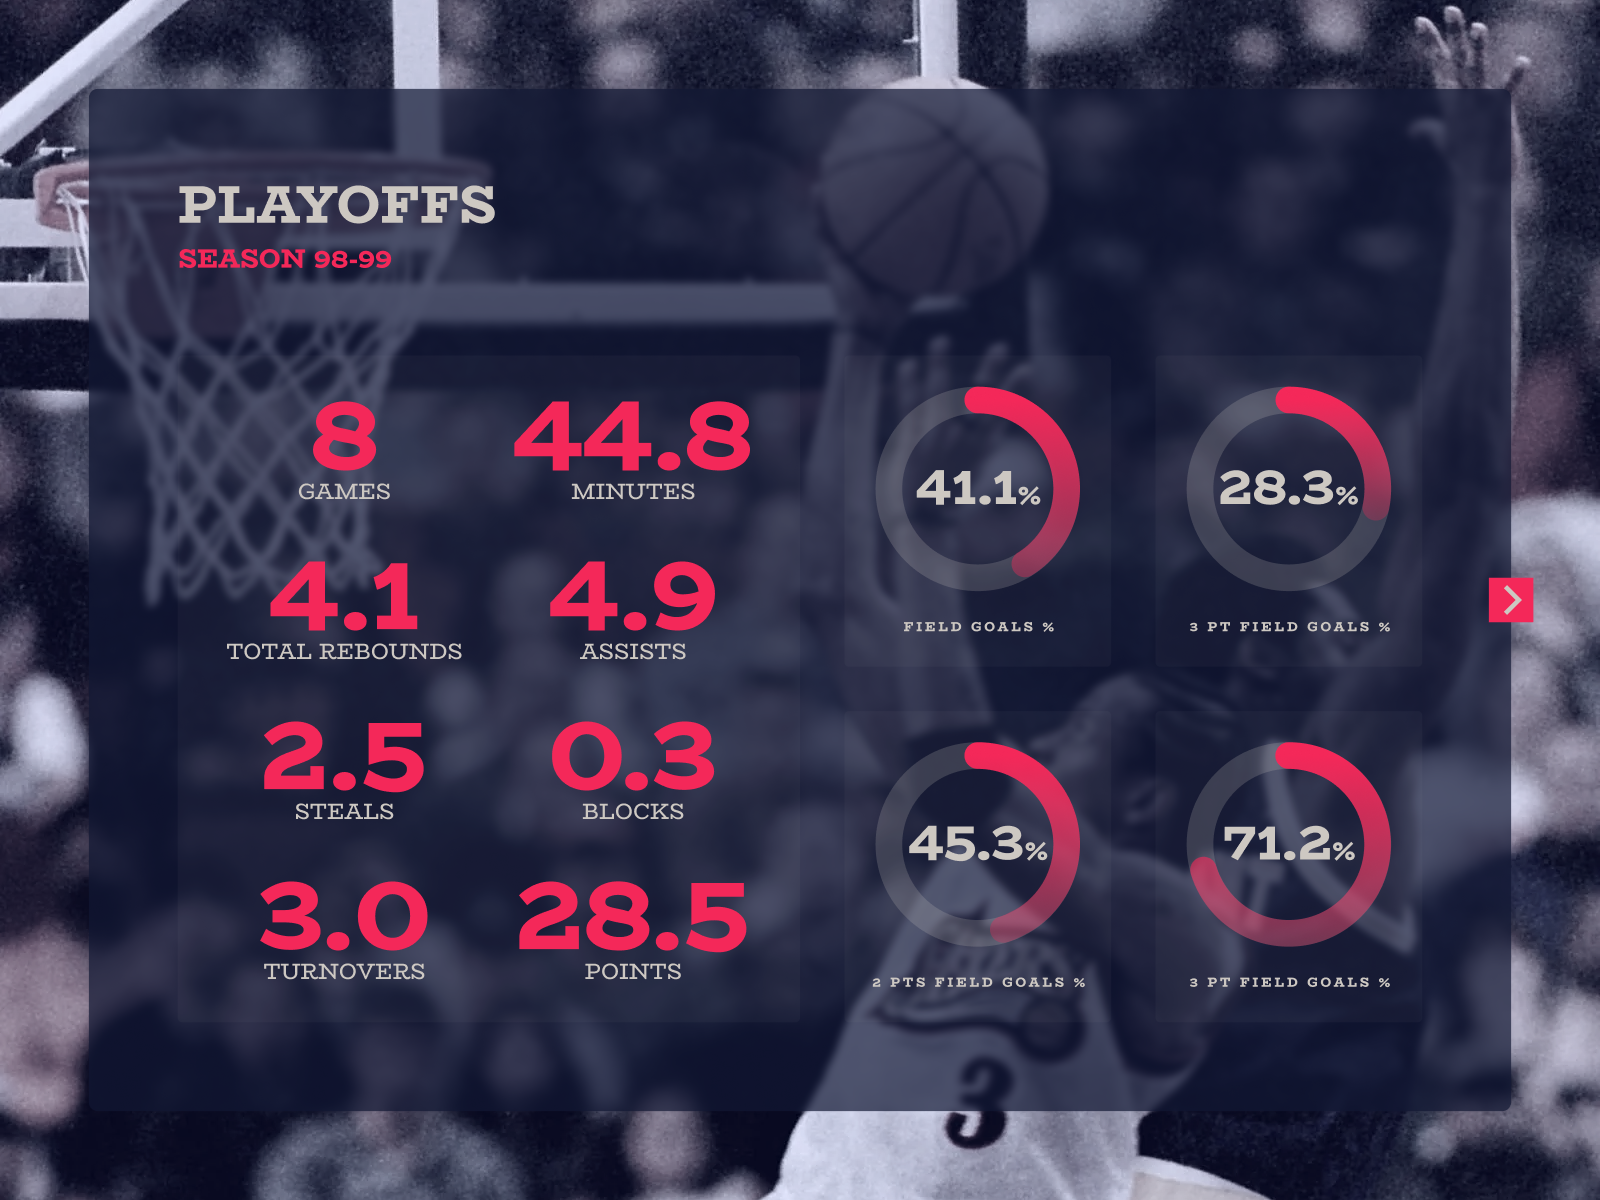 studying-for-a-basketball-statistics-page-pt-iii-by-laura-fia-on-dribbble